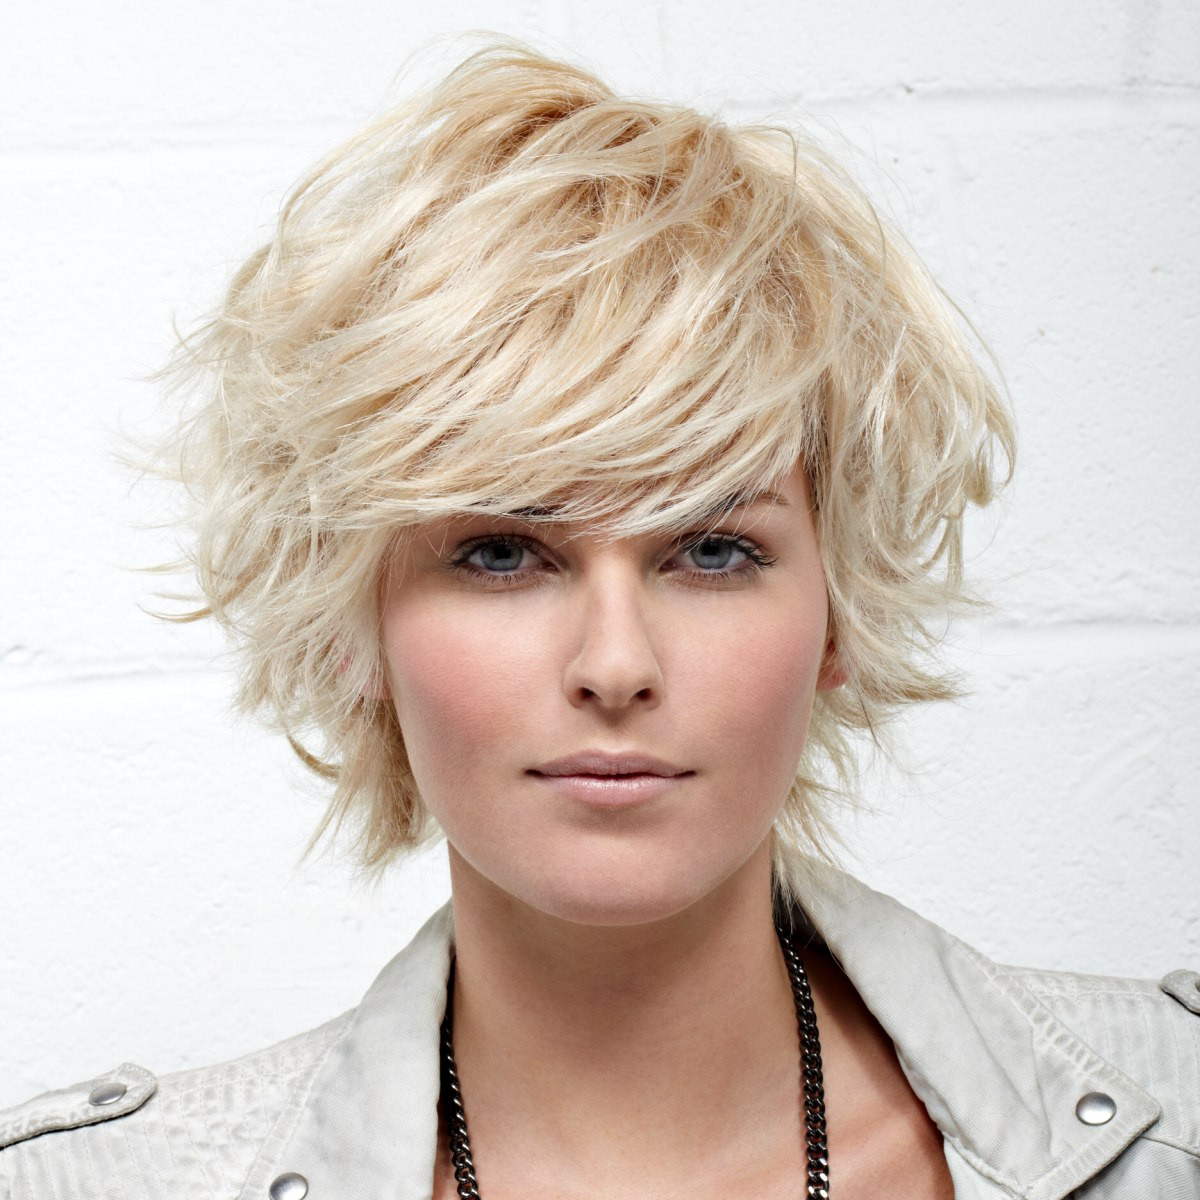 Short Flipped Hairstyle
 Feathery short haircut with the ends flipped up and out